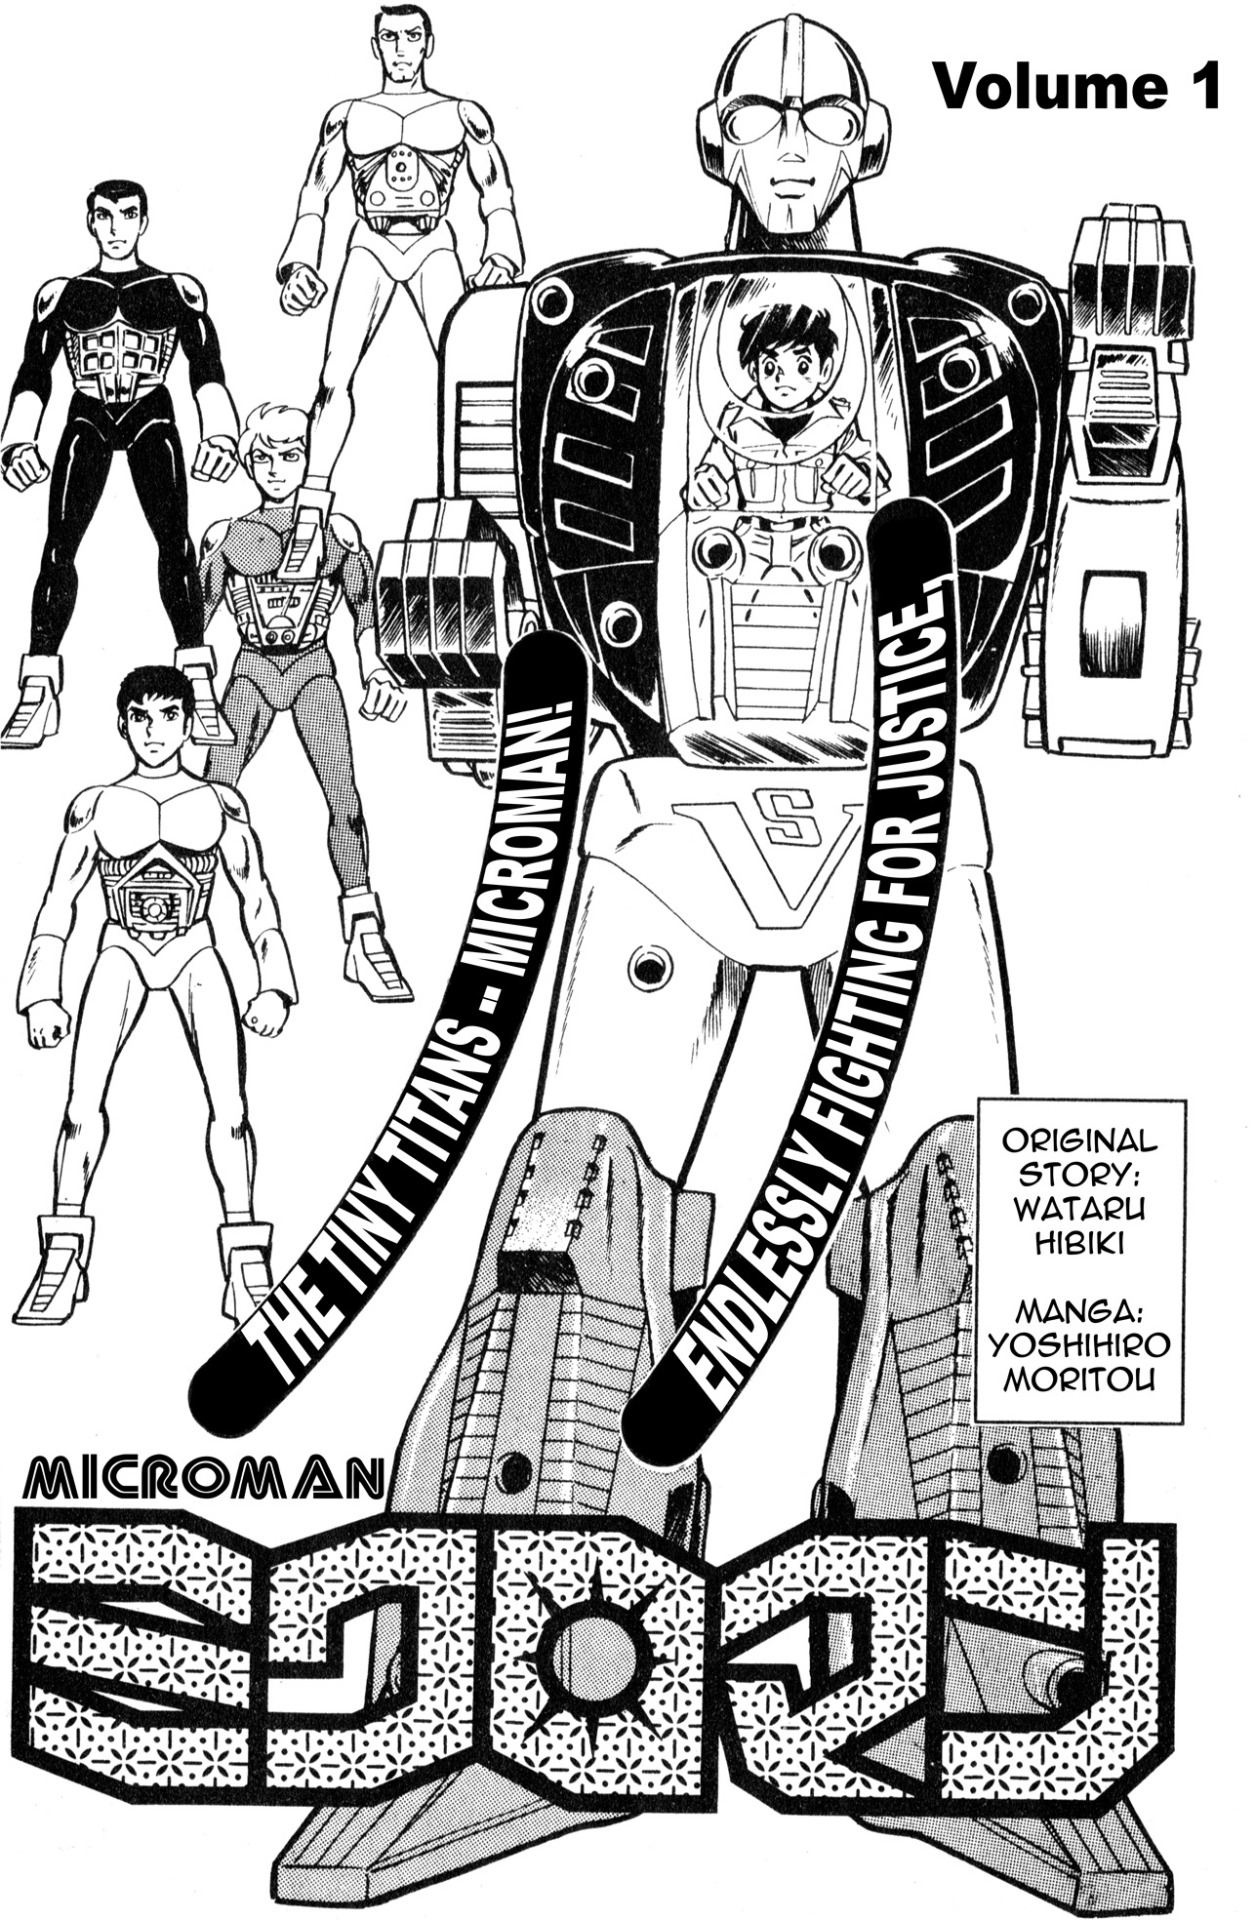 Microman Club — At the beginning of 1976, TV Magazine launched